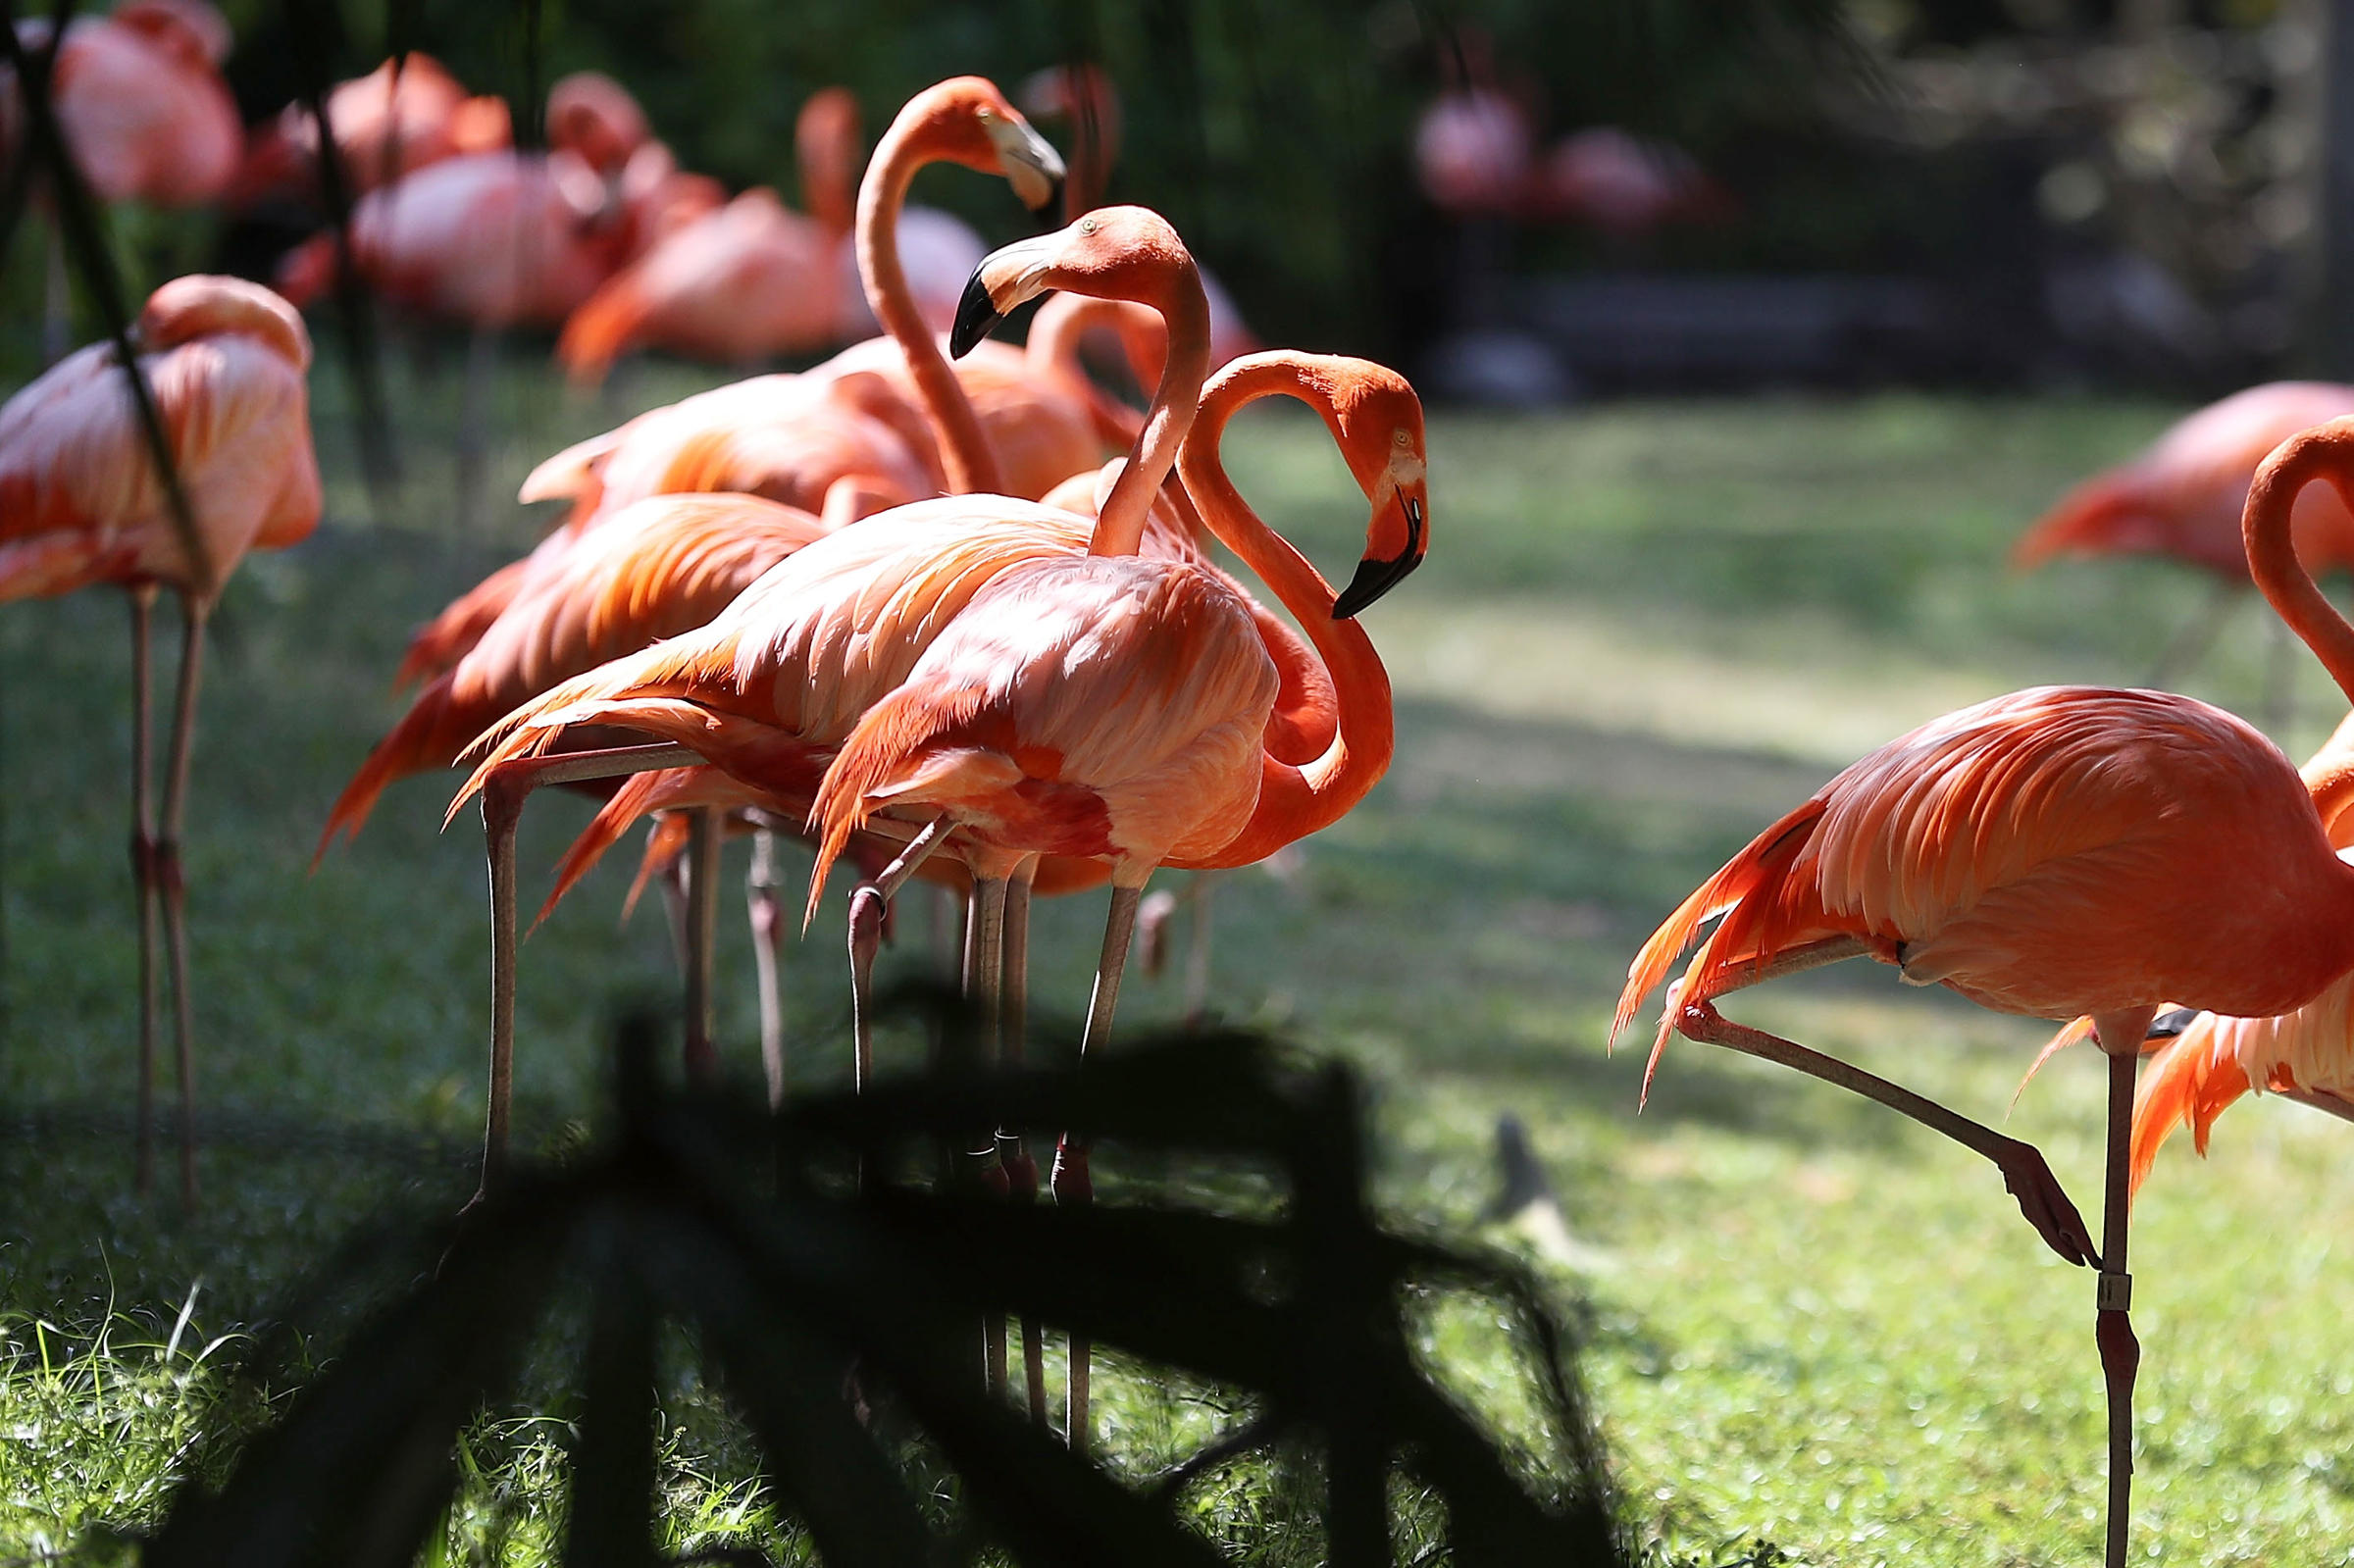 Florida's Long-Lost Wild Flamingos Were Hiding In Plain Sight | KUOW ...